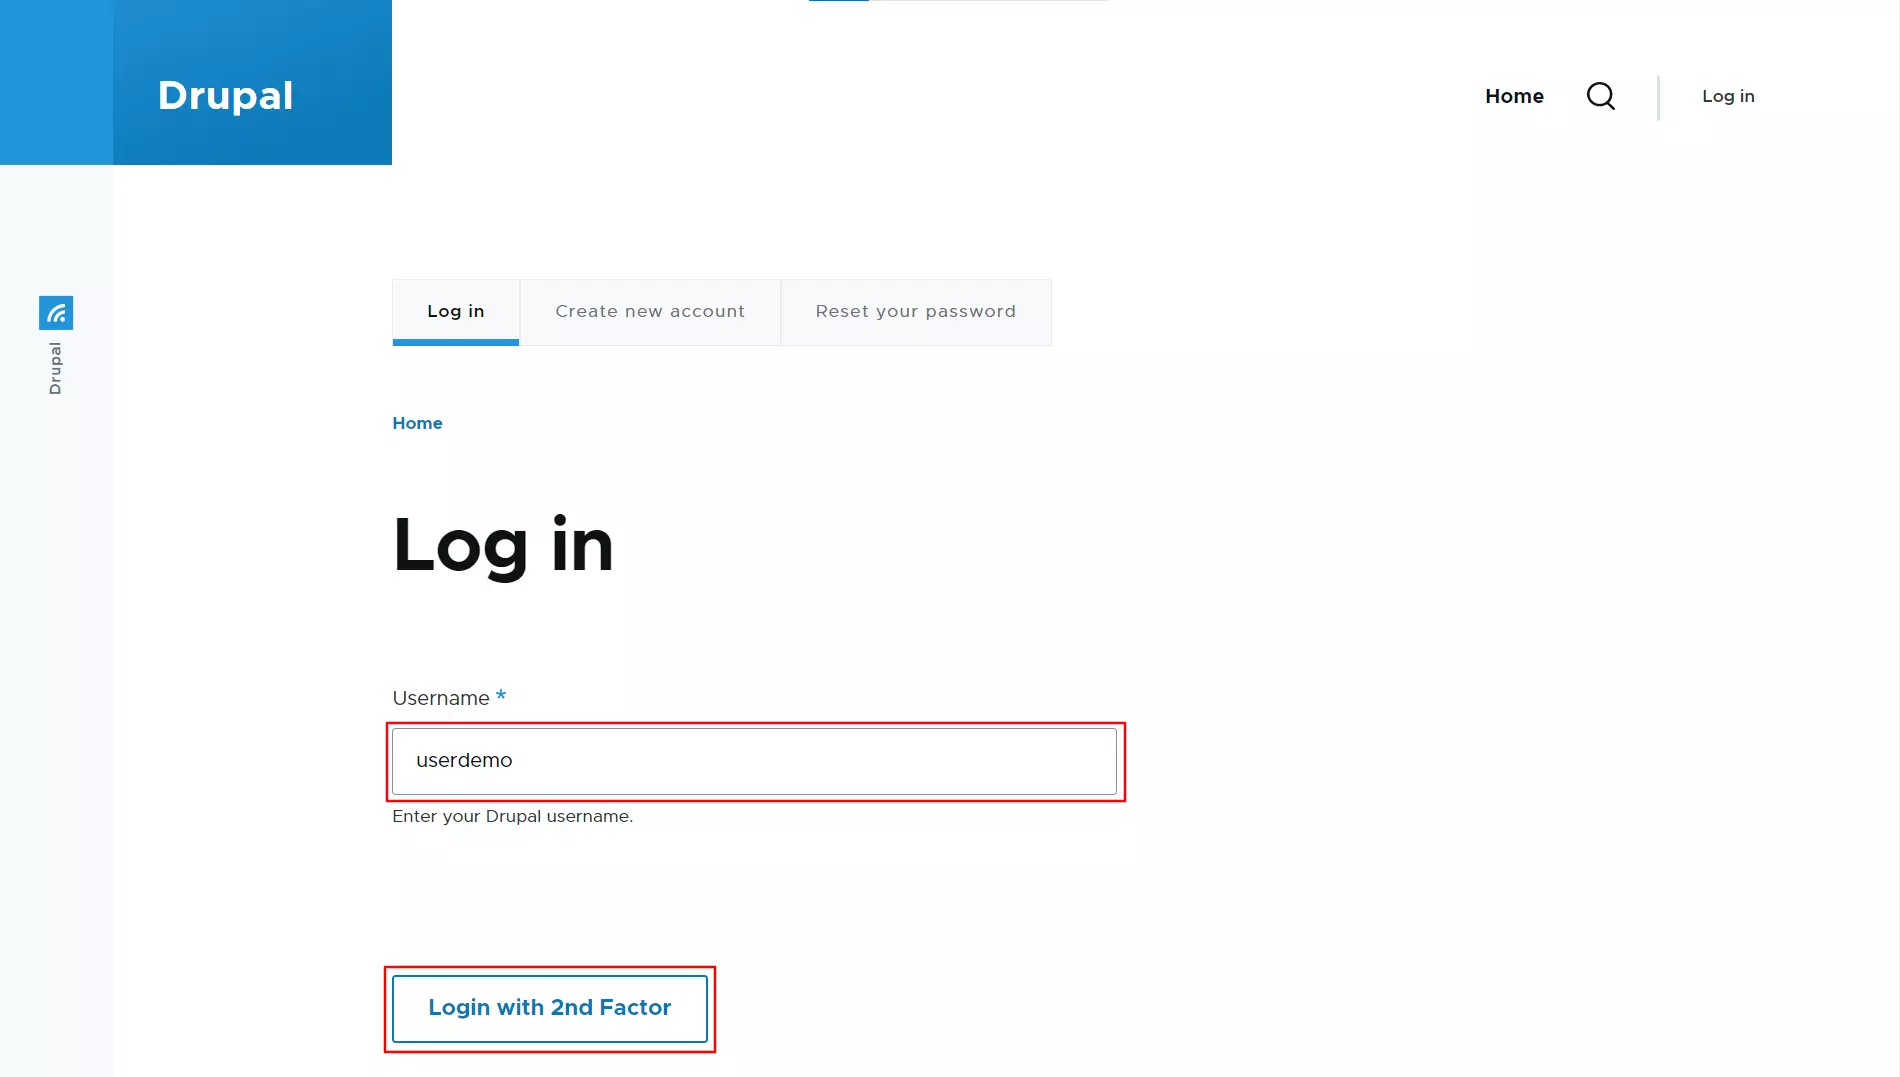 Drupal 2FA login with 2nd factor